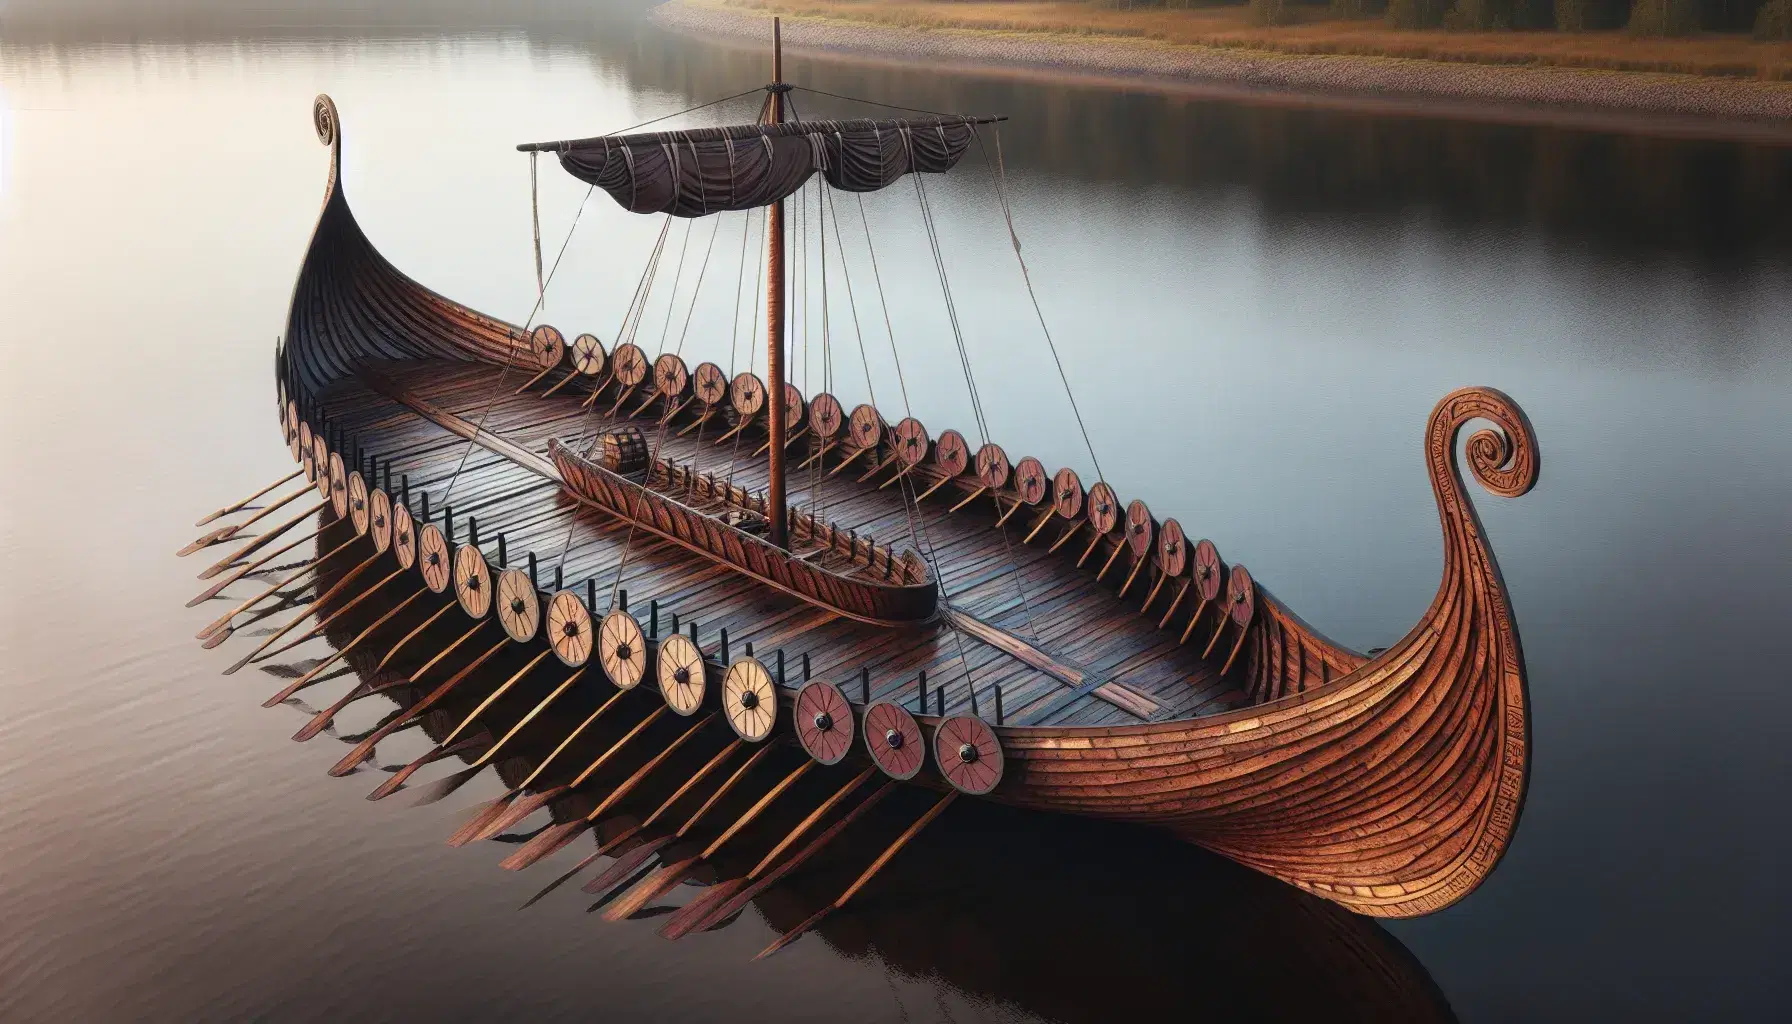 Reconstructed Viking longship docked on a riverbank with clinker-built hull, mast, red and black shields, and carved dragon heads, amidst a tranquil riverside setting.